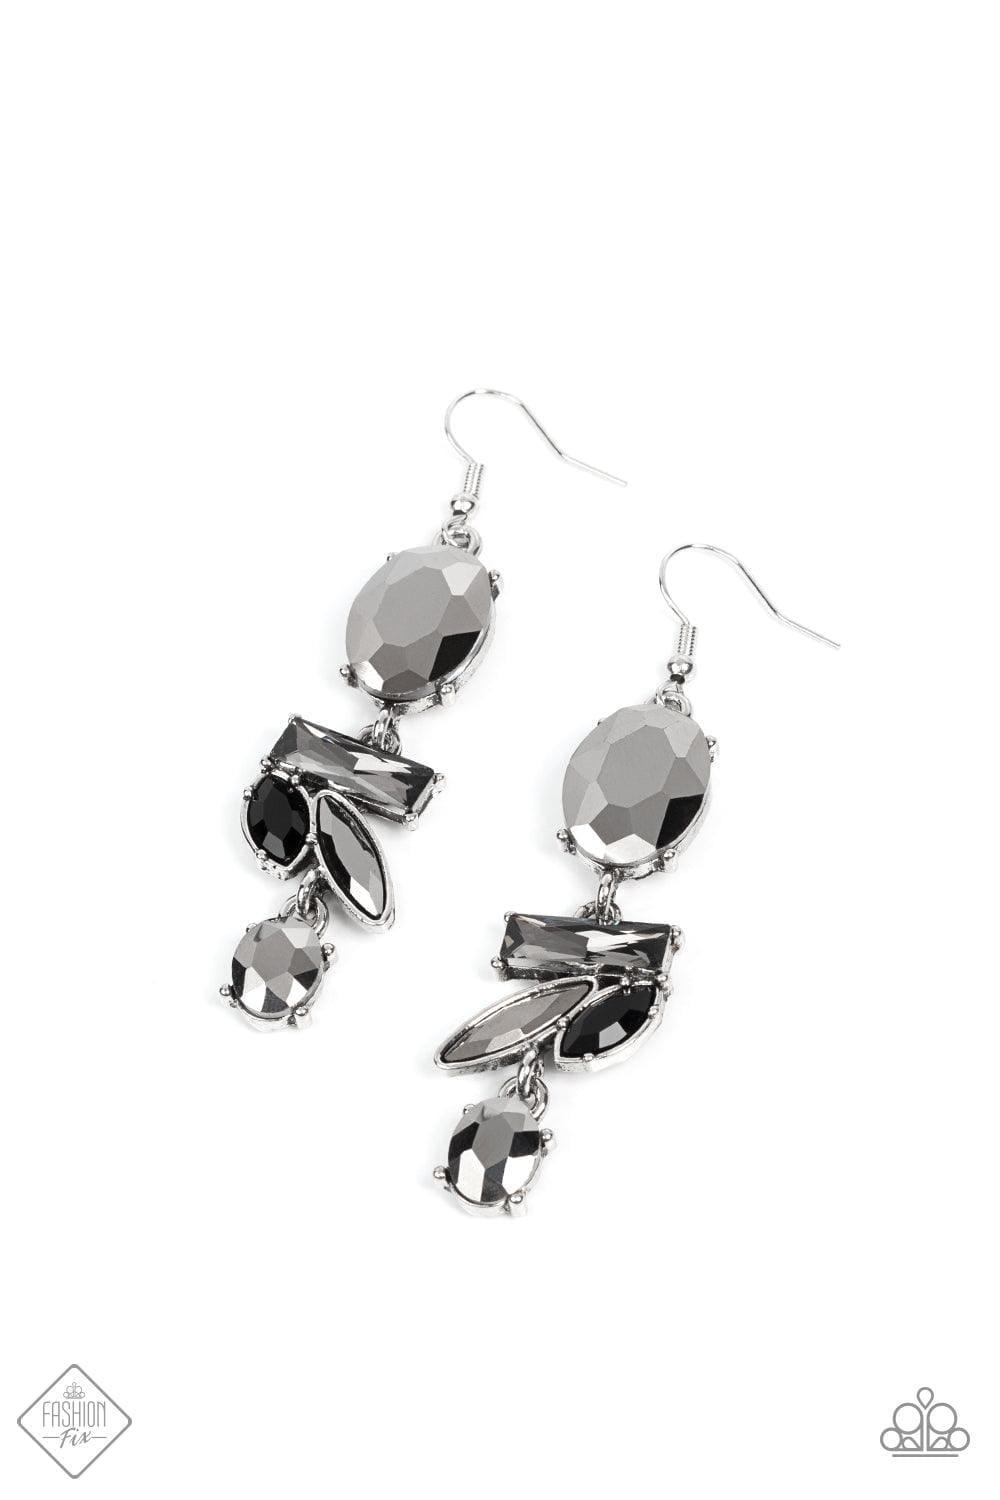 Paparazzi Accessories - Modern Makeover - Silver Earrings - Bling by JessieK